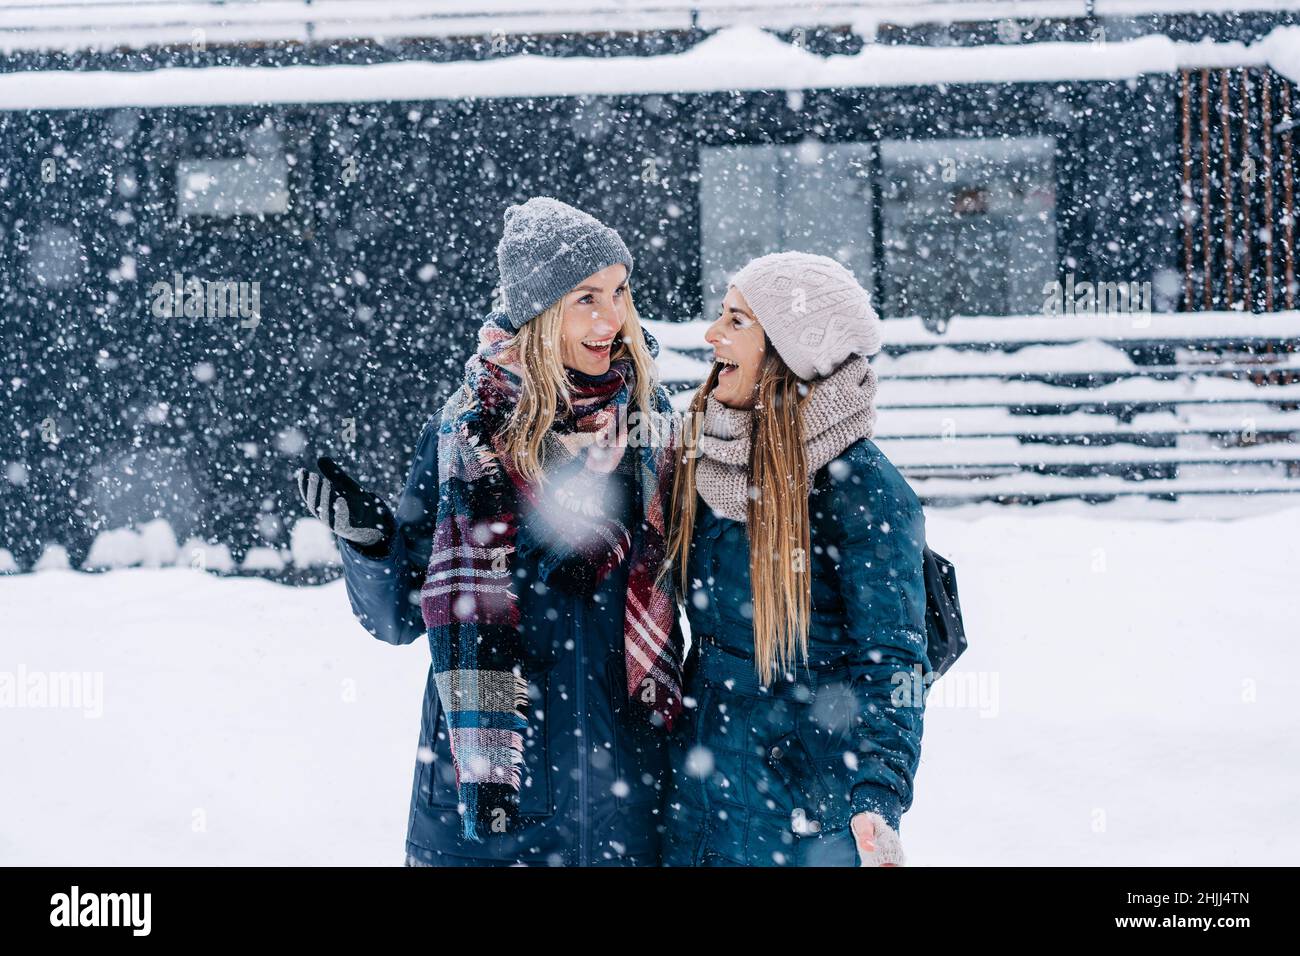 Two young women in warm winter clothes stand under the snowfall and laugh merrily. Stock Photo